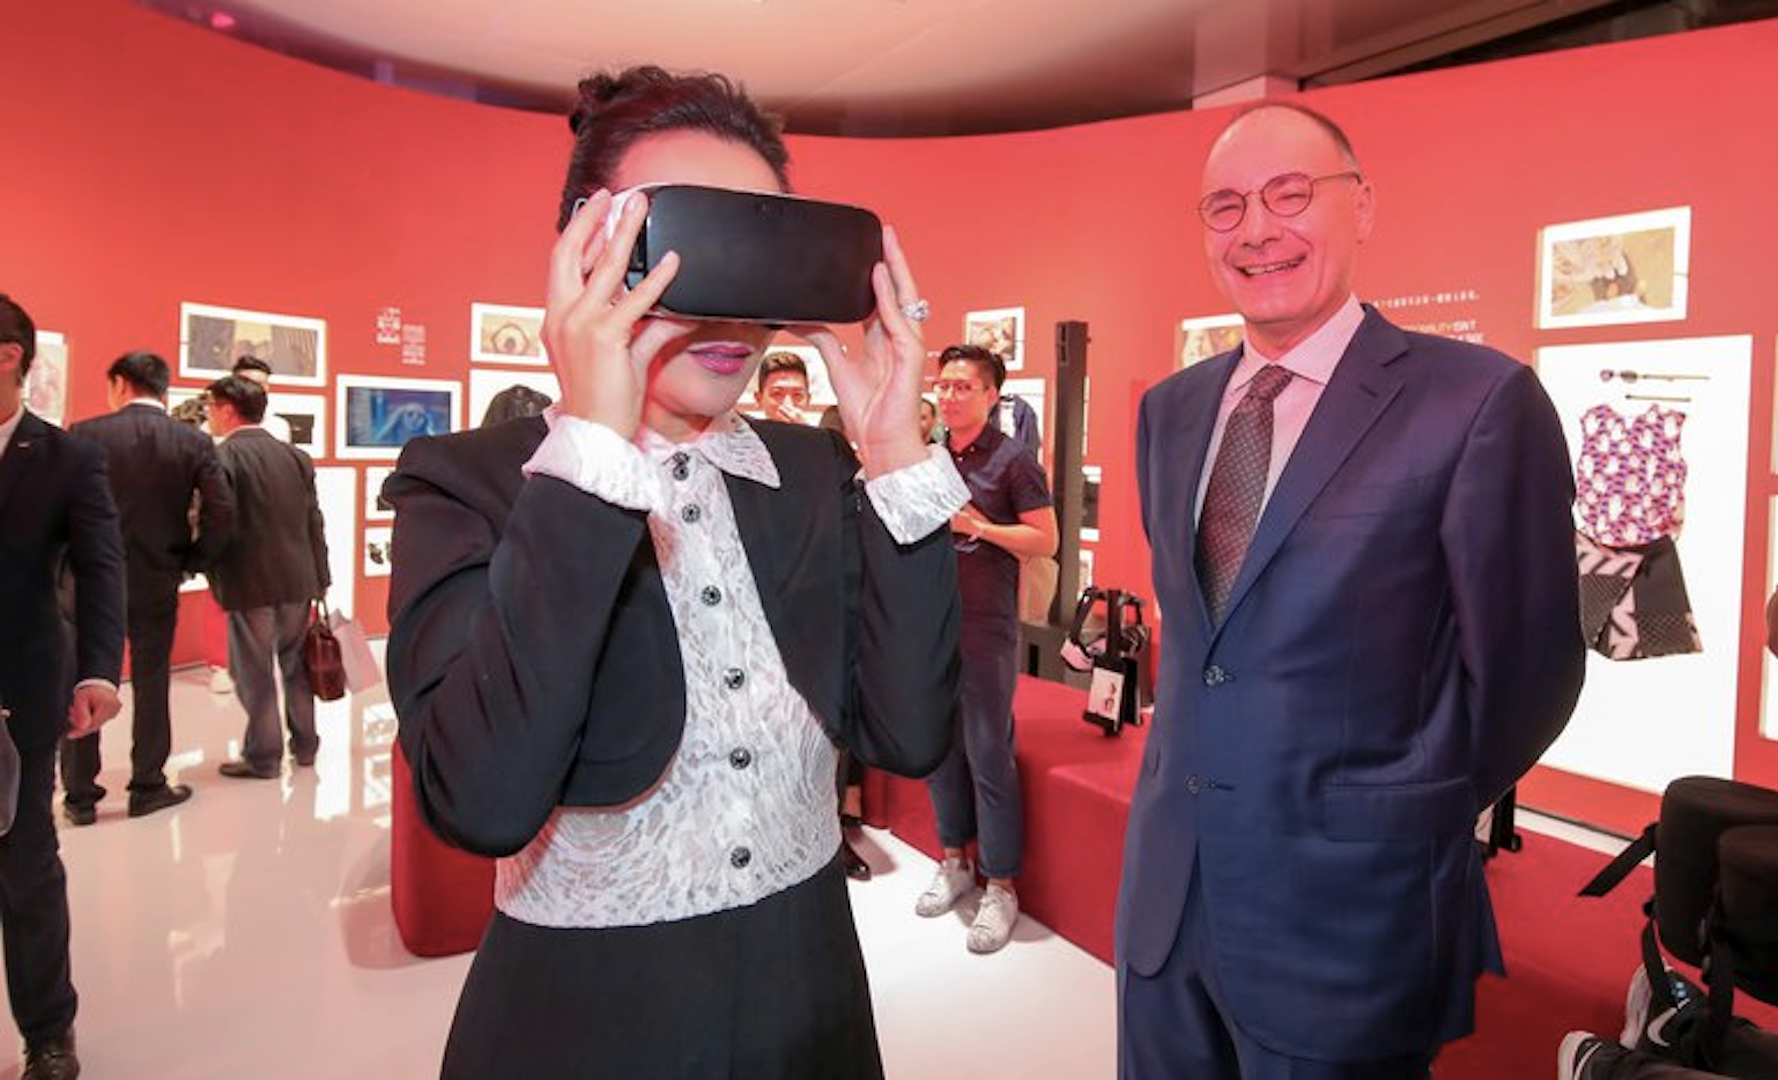 Carina Lau (L) tests out a VR headset with Mei.com CEO Thibault Villet (R) at Mei.com’s launch event for its online shopping festival in Shanghai in 2016. (Courtesy Photo)